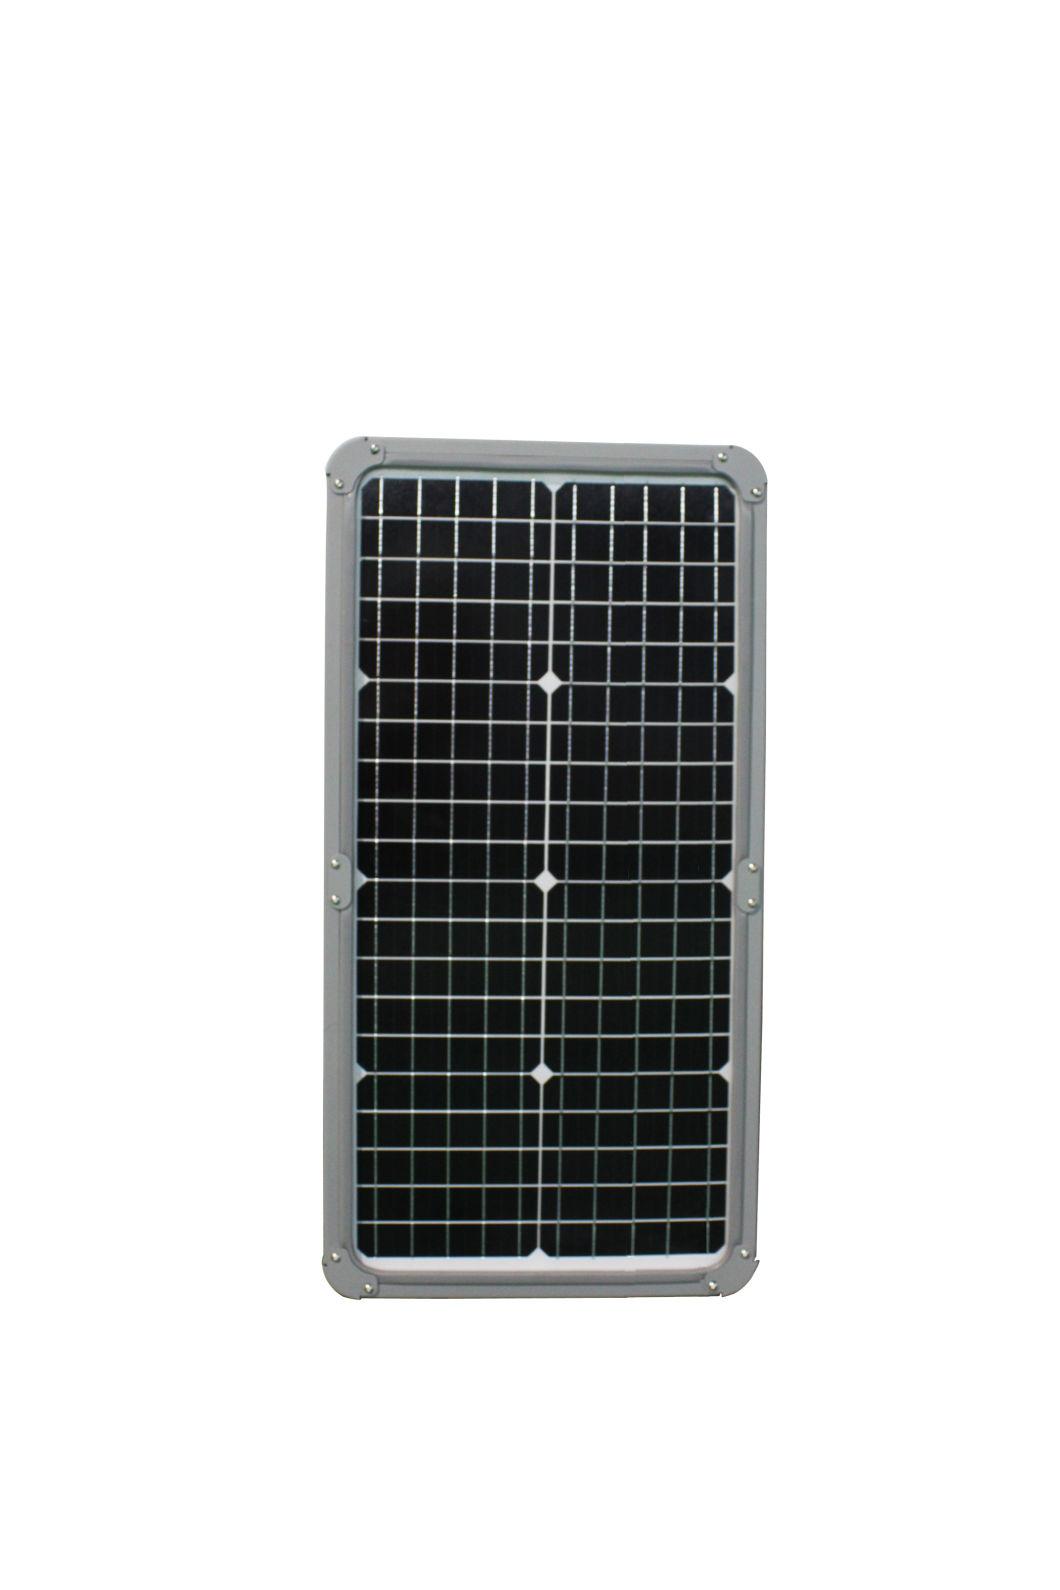 60 80 Watts LED Solar Street Lights for Projects Can Customizable Watts